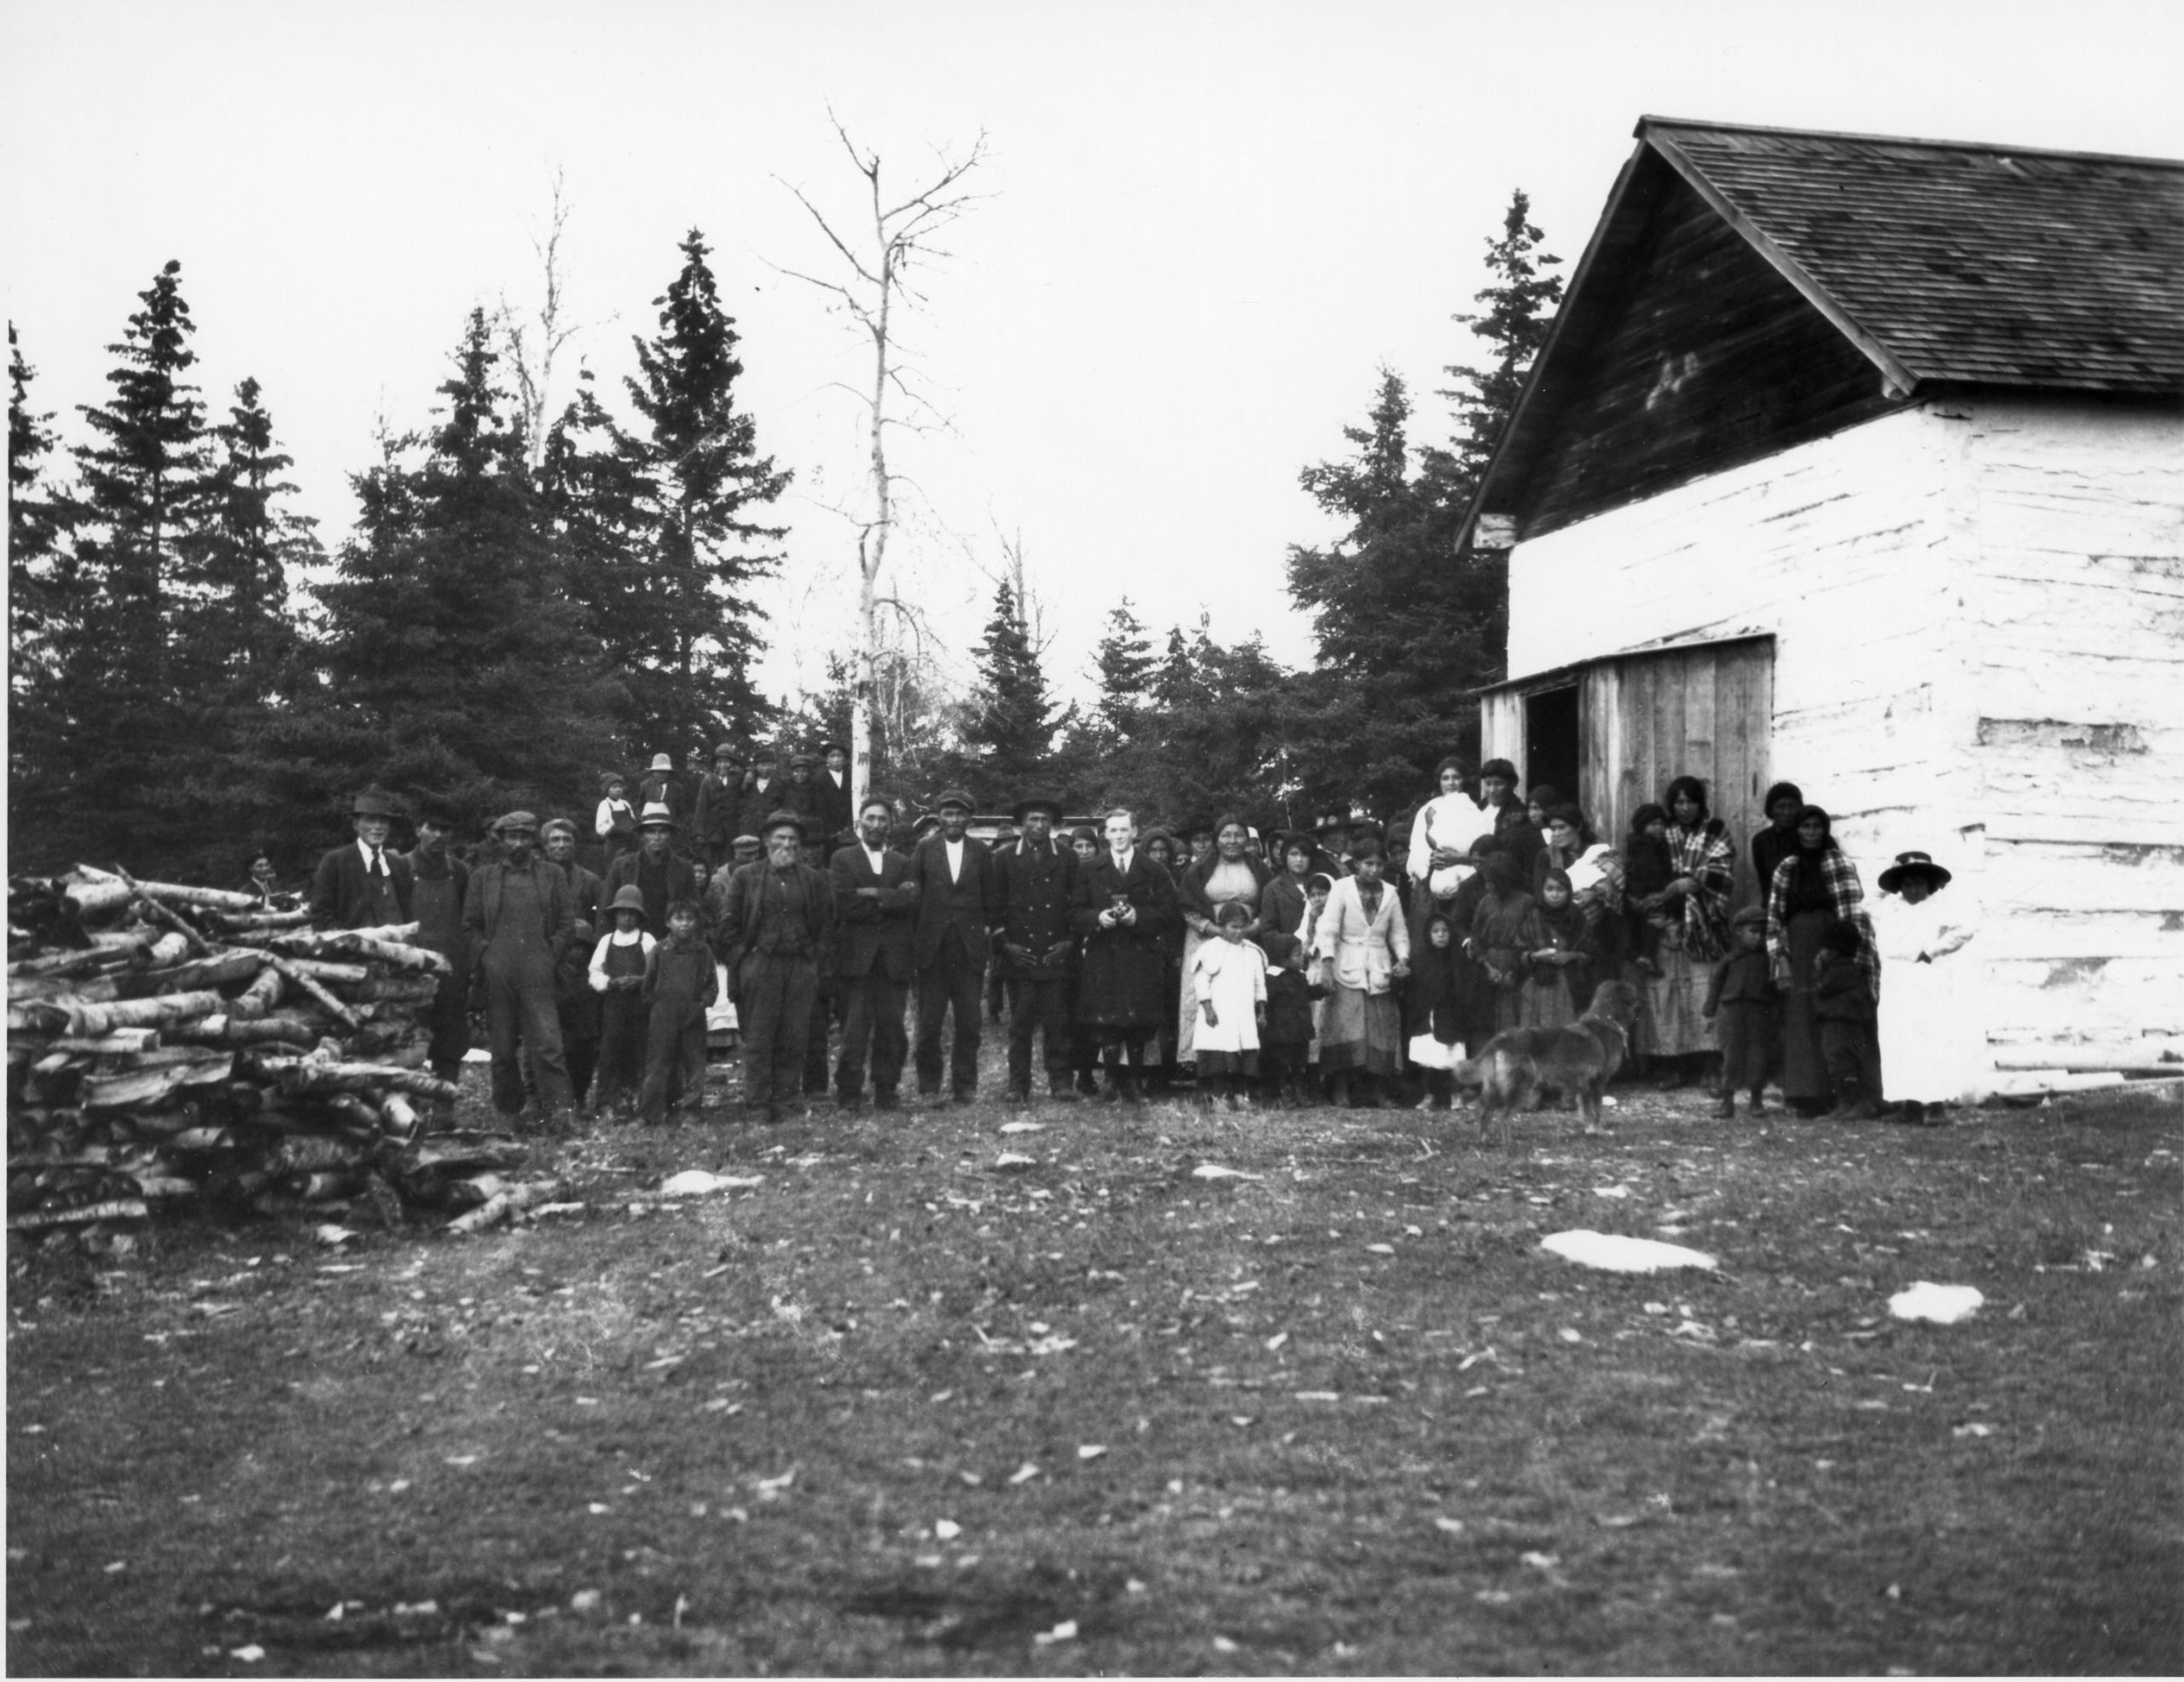 A group of several dozen people standing together outside in front of a treed area next to a single-storey wooden building.